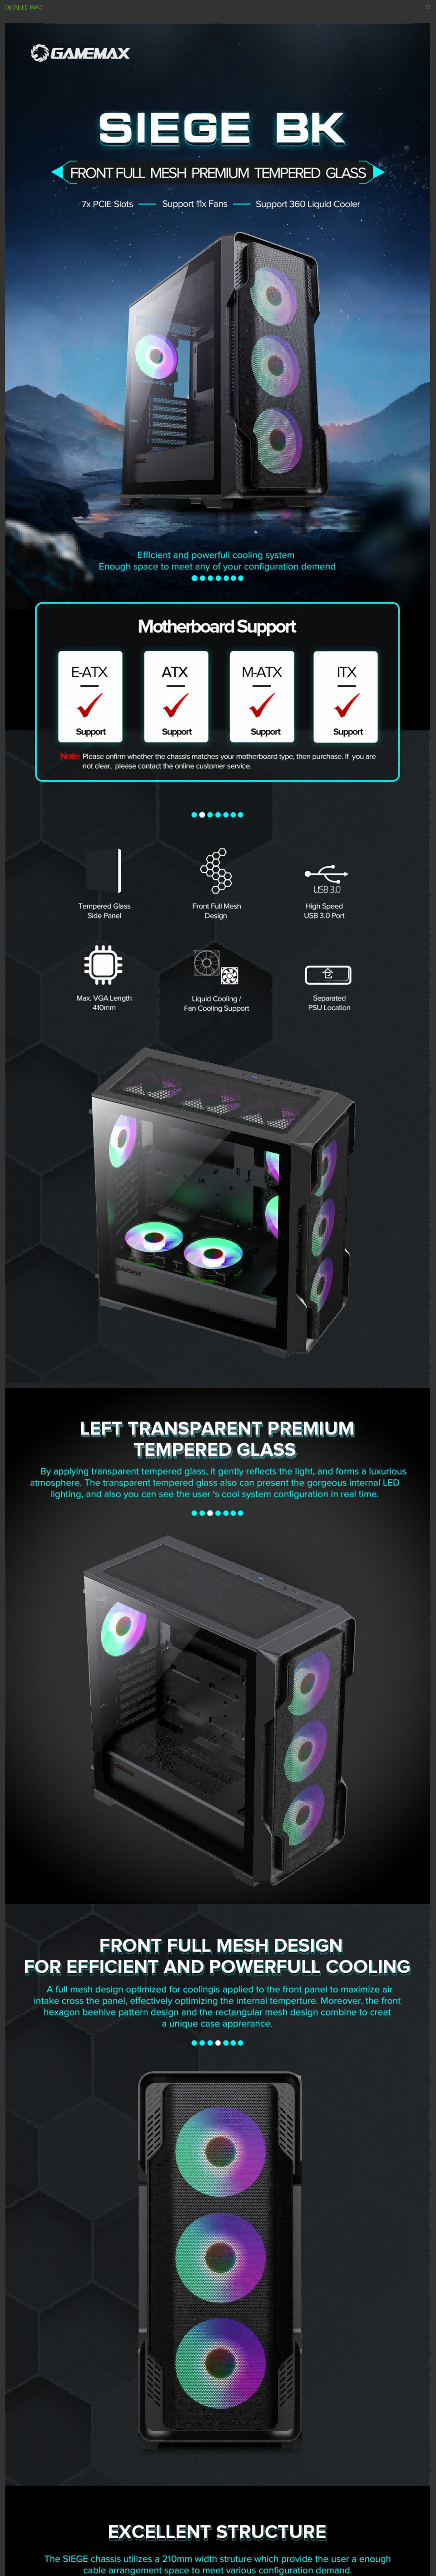 Cases-GameMax-Siege-E-ATX-Mid-Tower-Gaming-Case-Mesh-front-panel-Design-For-Optimal-Airflow-1x-Tempered-glass-side-panel-Pre-installed-4x-ARGB-Fans-30